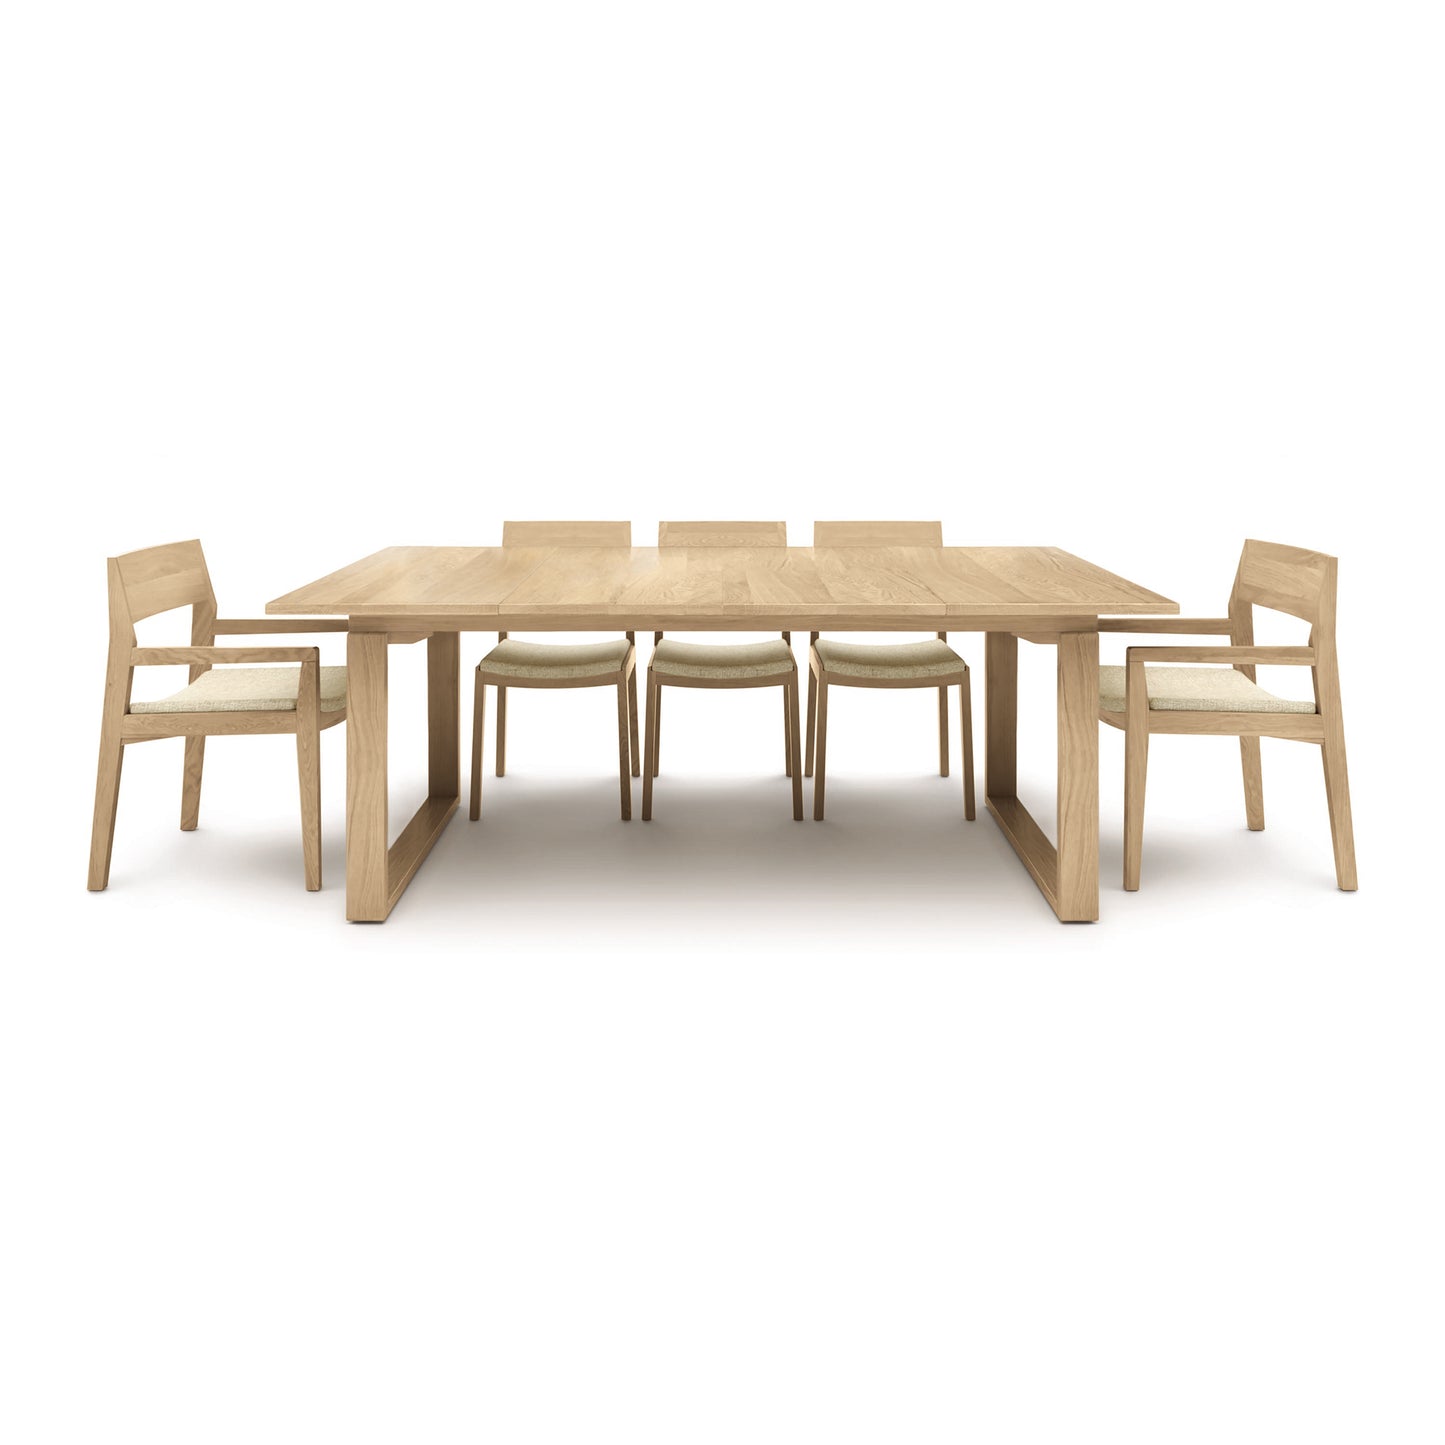 A solid oak Copeland Furniture Iso Extension Dining Table with six matching chairs on a white background.